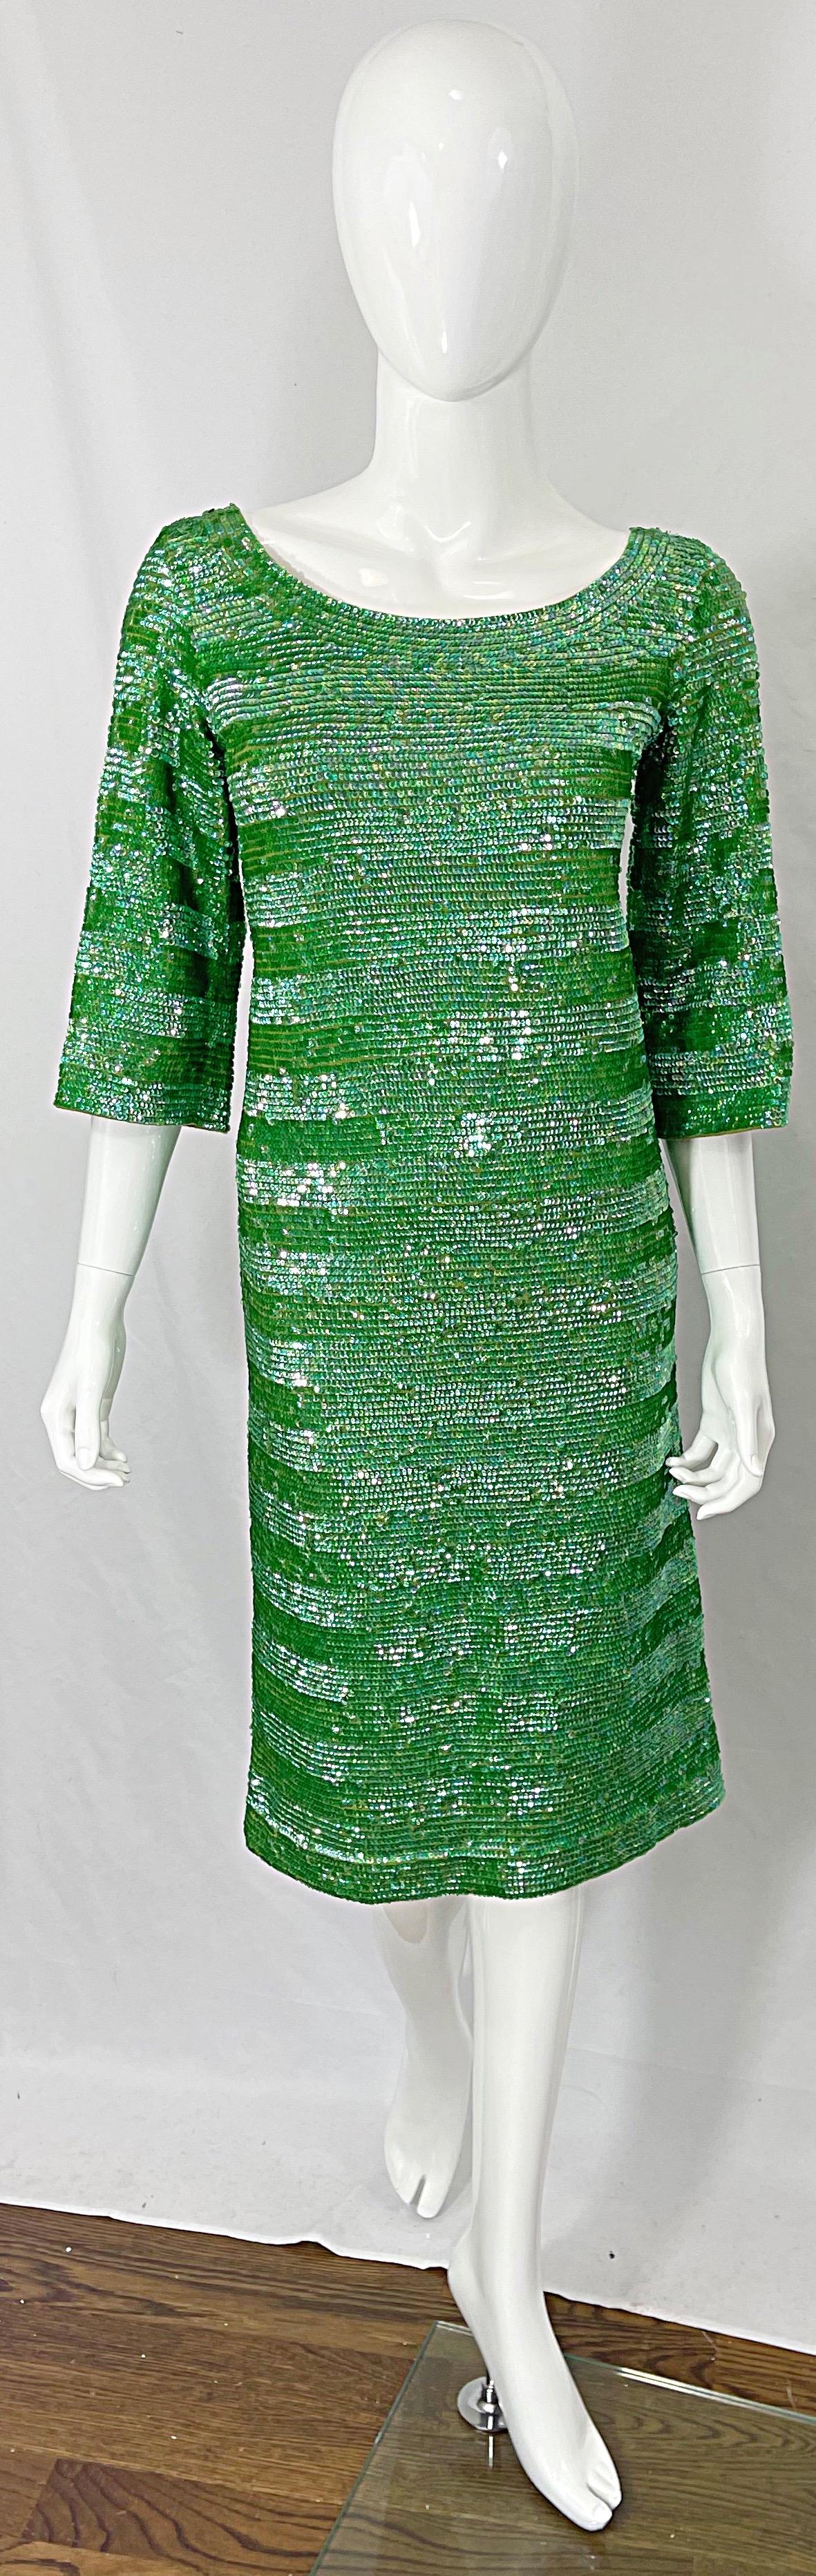 Chic early 60s vintage lime green fully sequined 3/4 sleeves wool dress ! Features thousands of hand-sewn sequins throughout the entire dress. Fully lined in rayon with full metal zipper up the back and hook-and-eye closure. 
Great for any day or